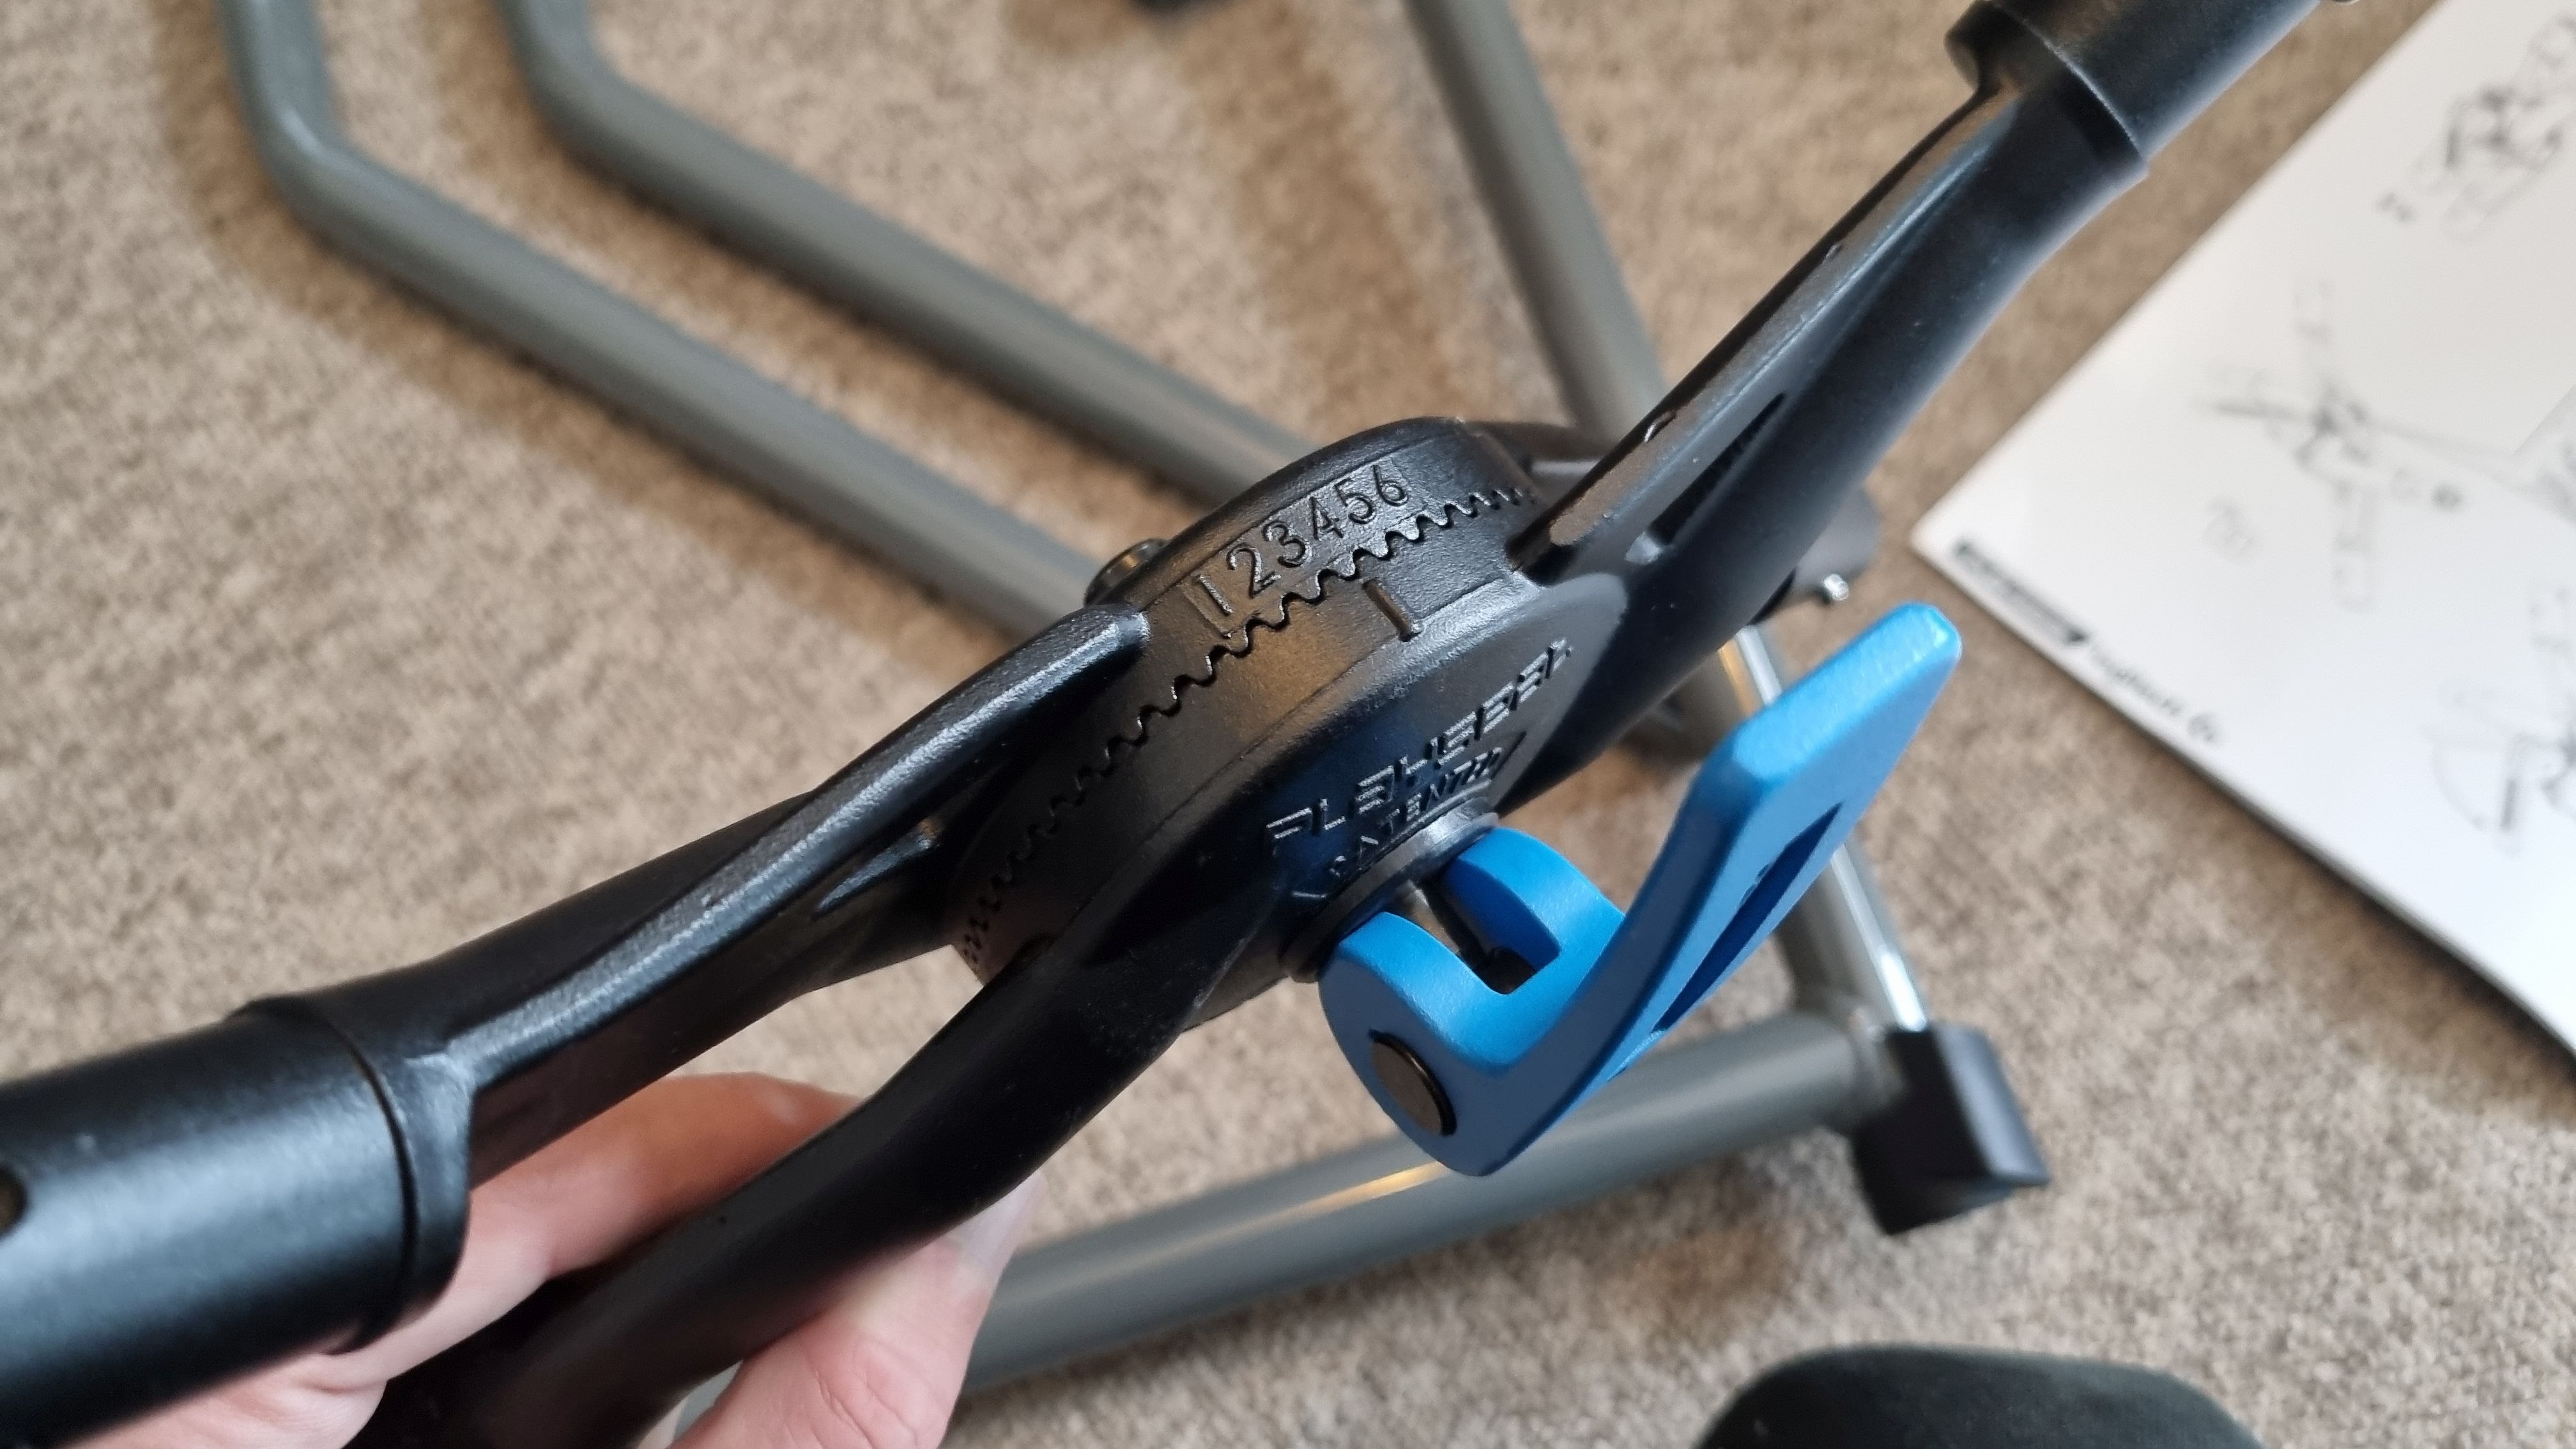 The X-adapt hinges on the Logitech Playseat Challenge X